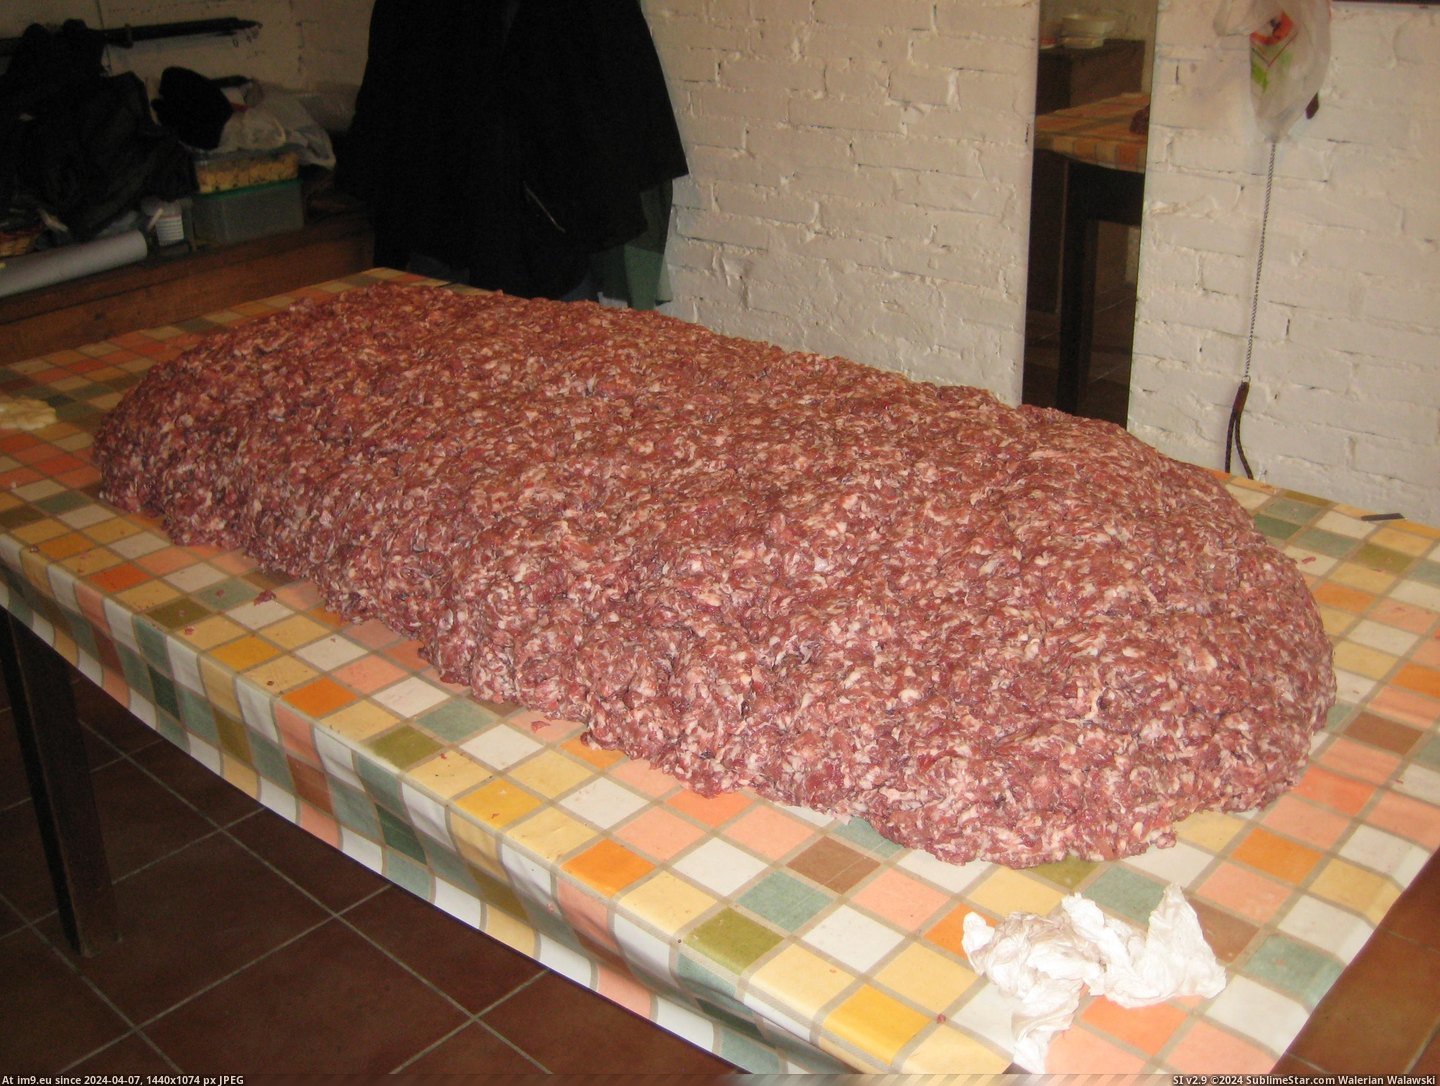 #Making #Homemade #Italy [Pics] Making homemade salami in Italy 11 Pic. (Image of album My r/PICS favs))